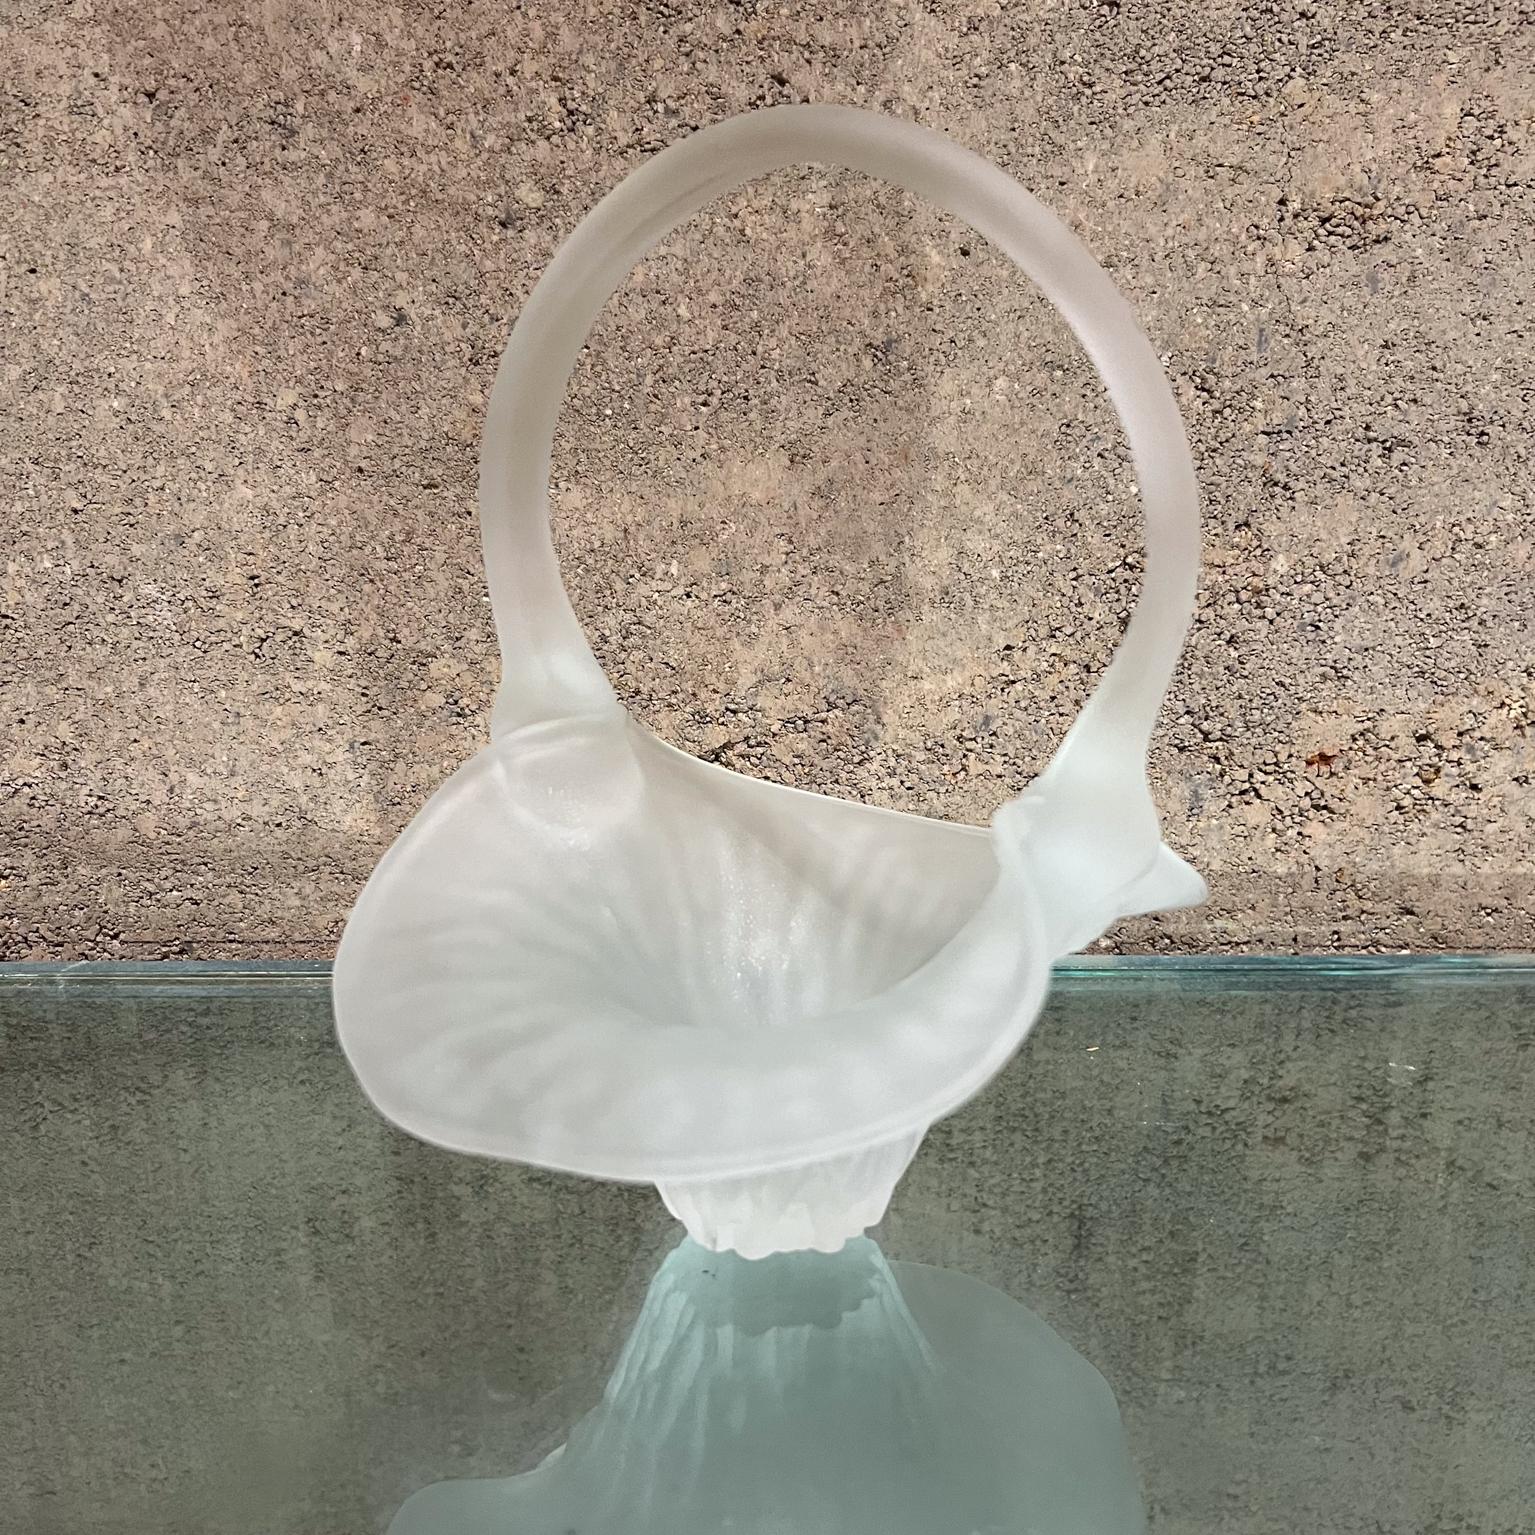 1980s Frosted Glass Candy Dish Ruffle Basket
8 h x 6.75 d x 6 w
Preowned original vintage condition
See images for condition.